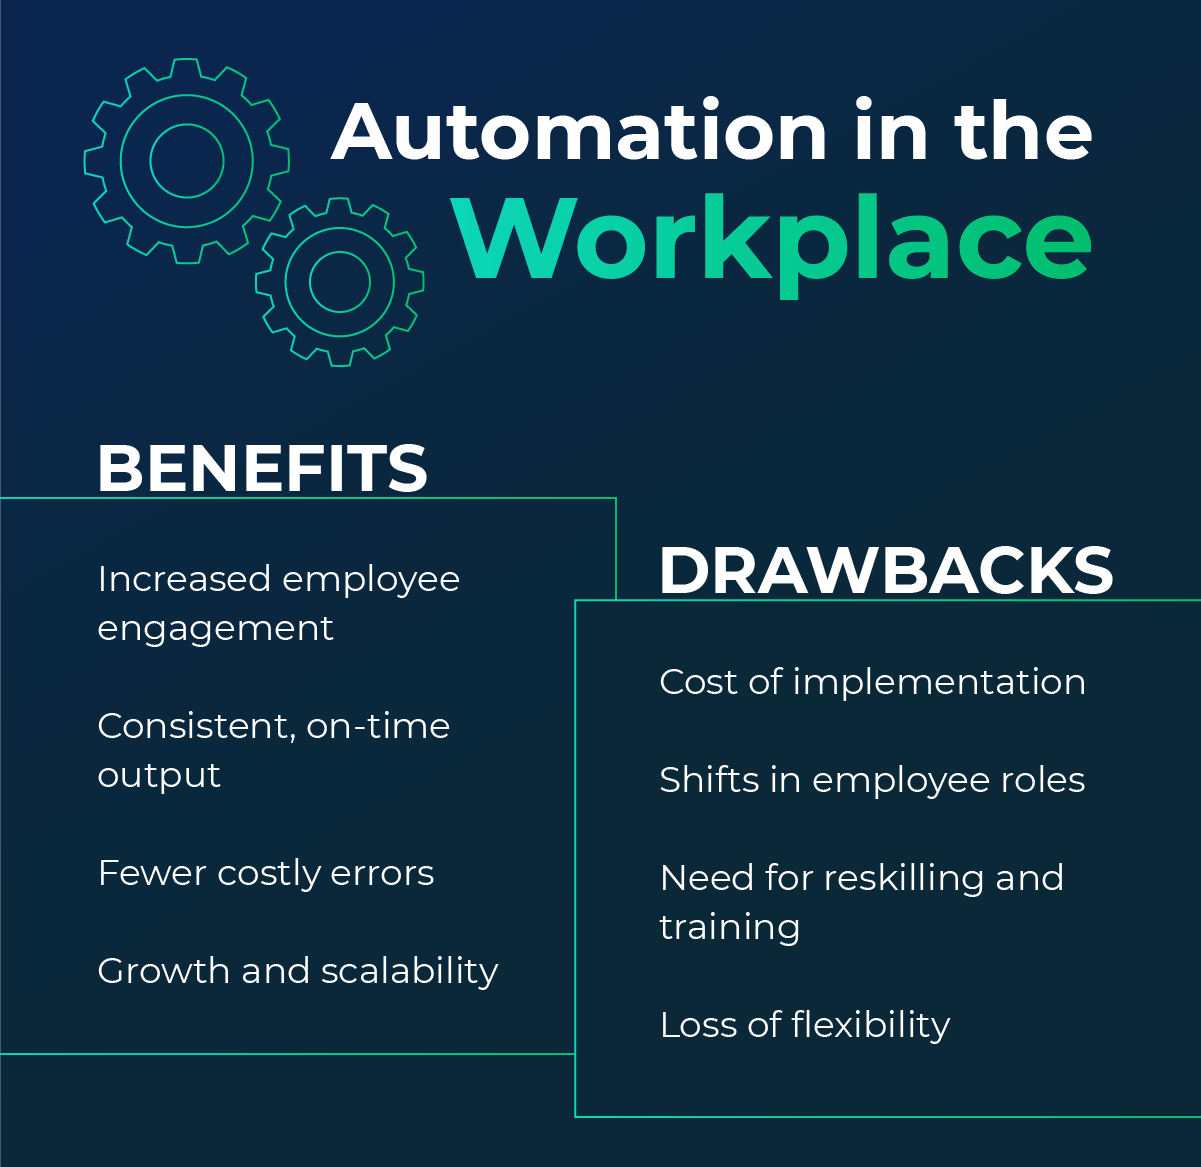 Chart listing the benefits and drawbacks of automation in the workplace